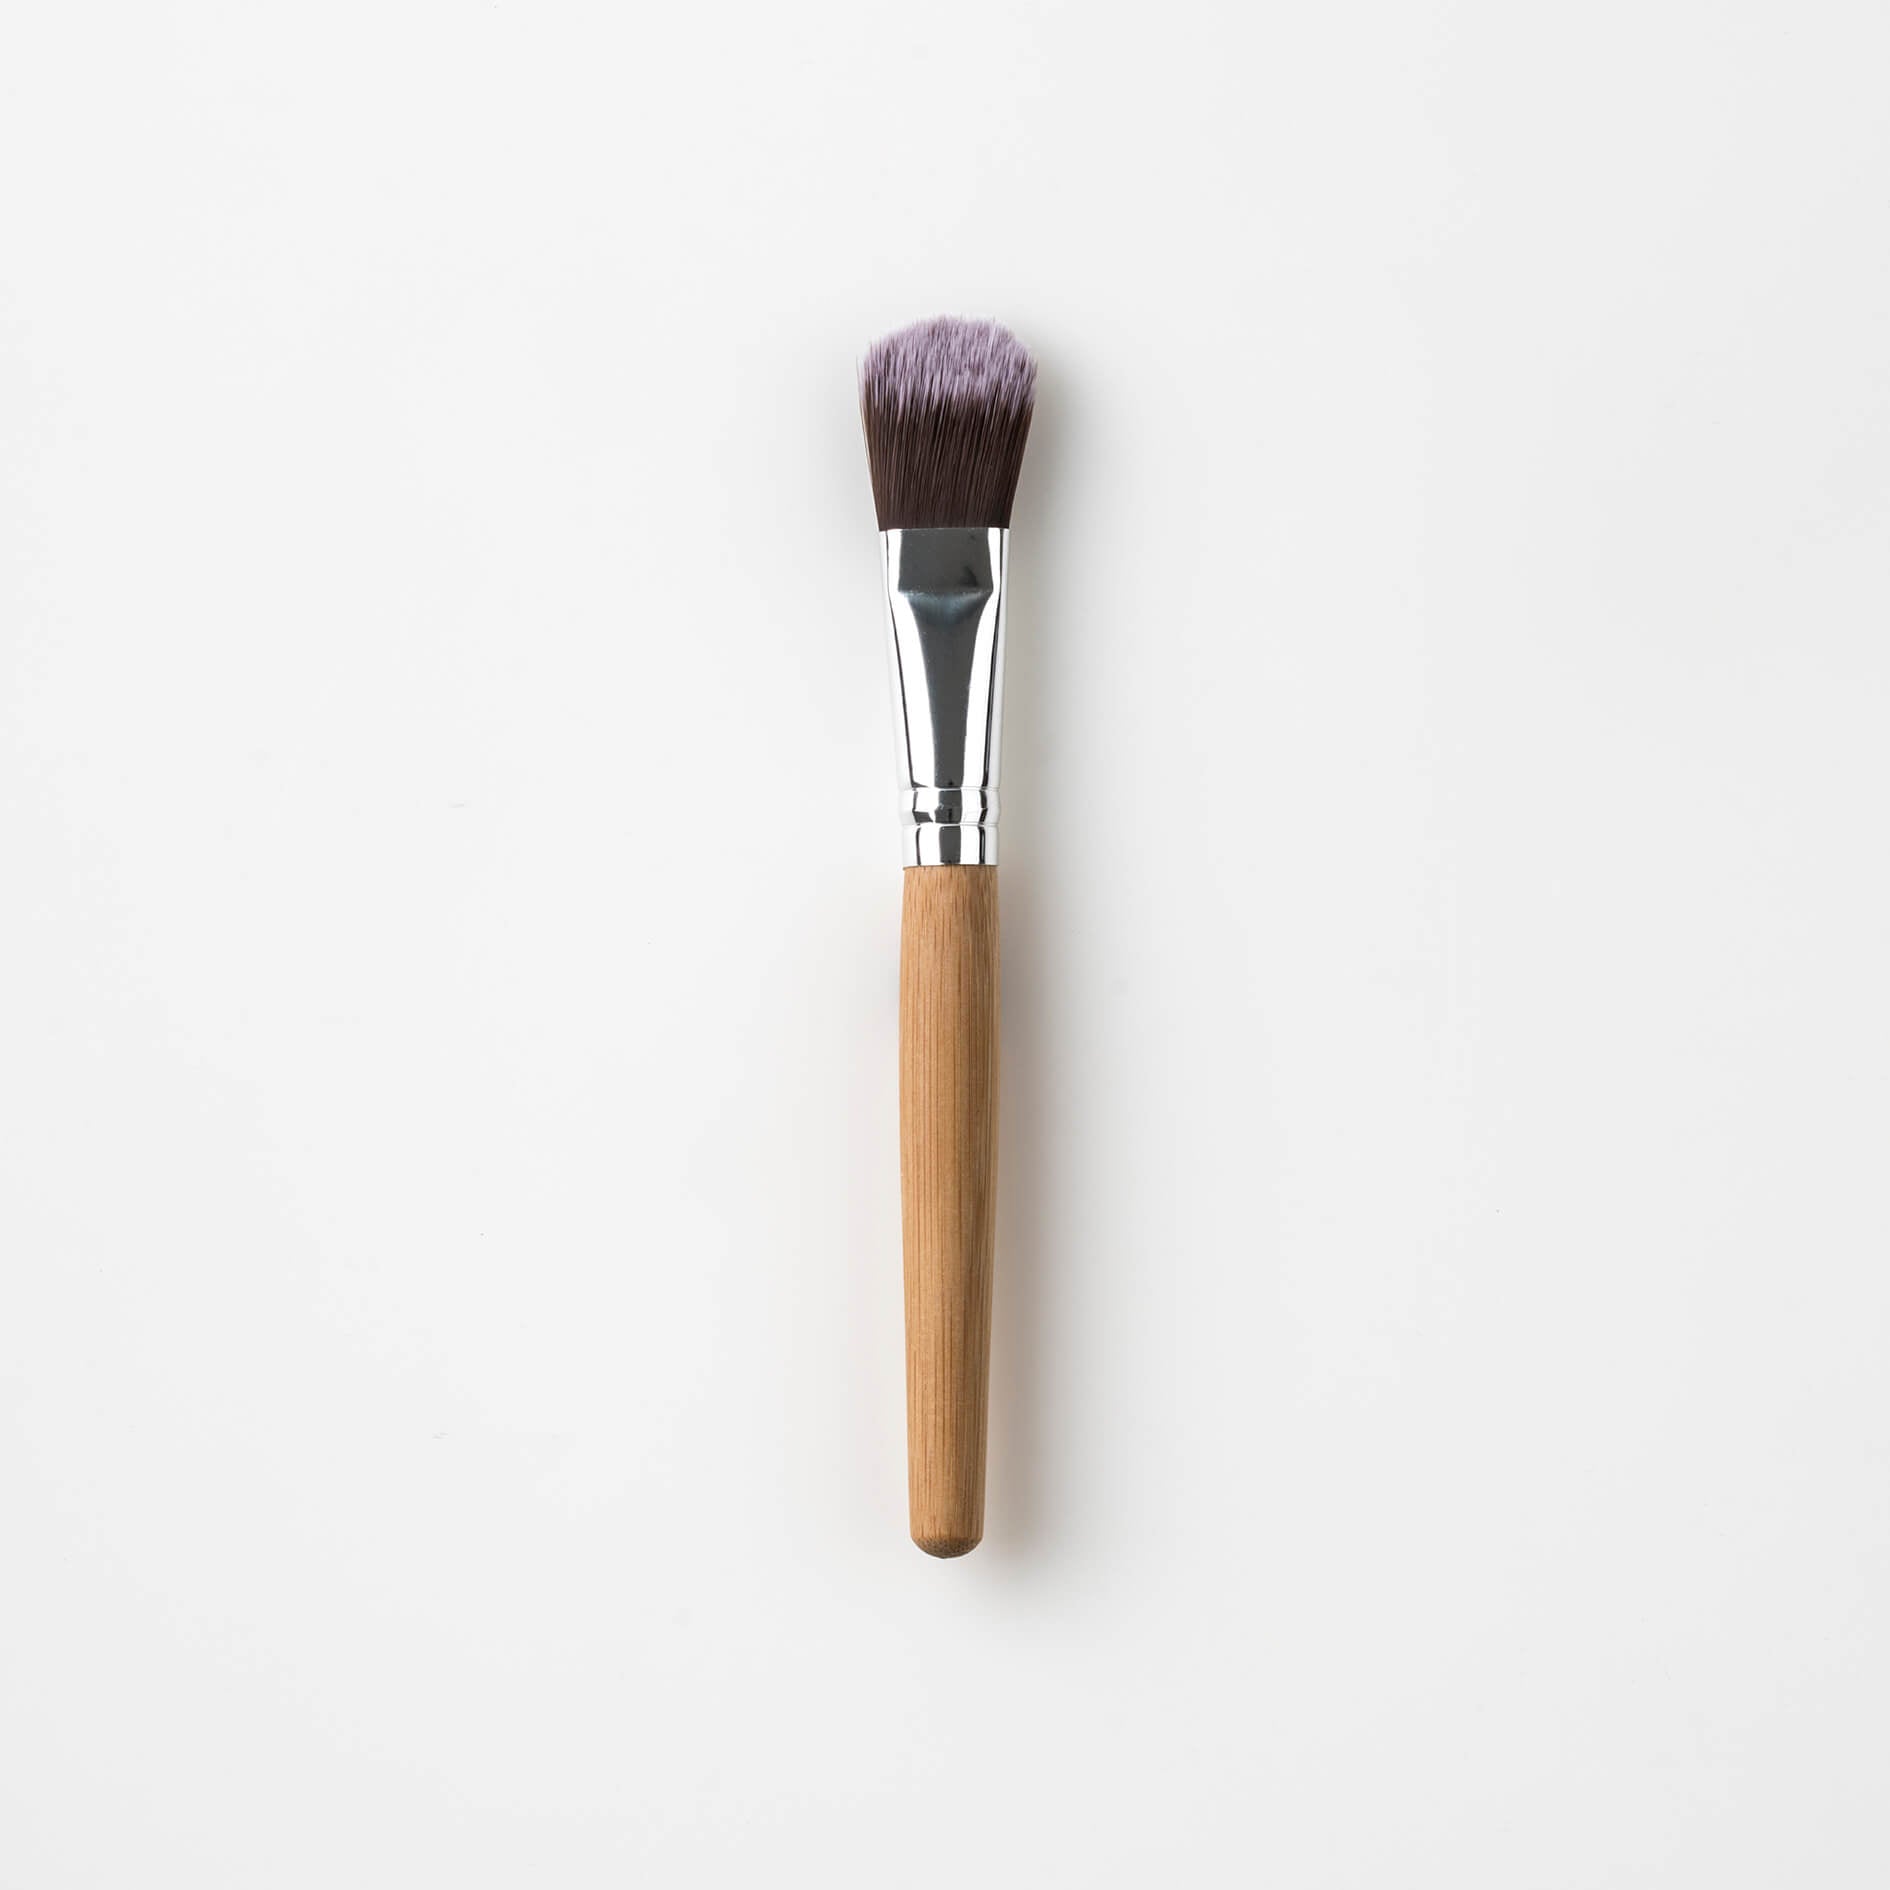 A Bristolmade bamboo masking brush, a sustainable and eco-friendly toolfor applying face masks evenly and smoothly.